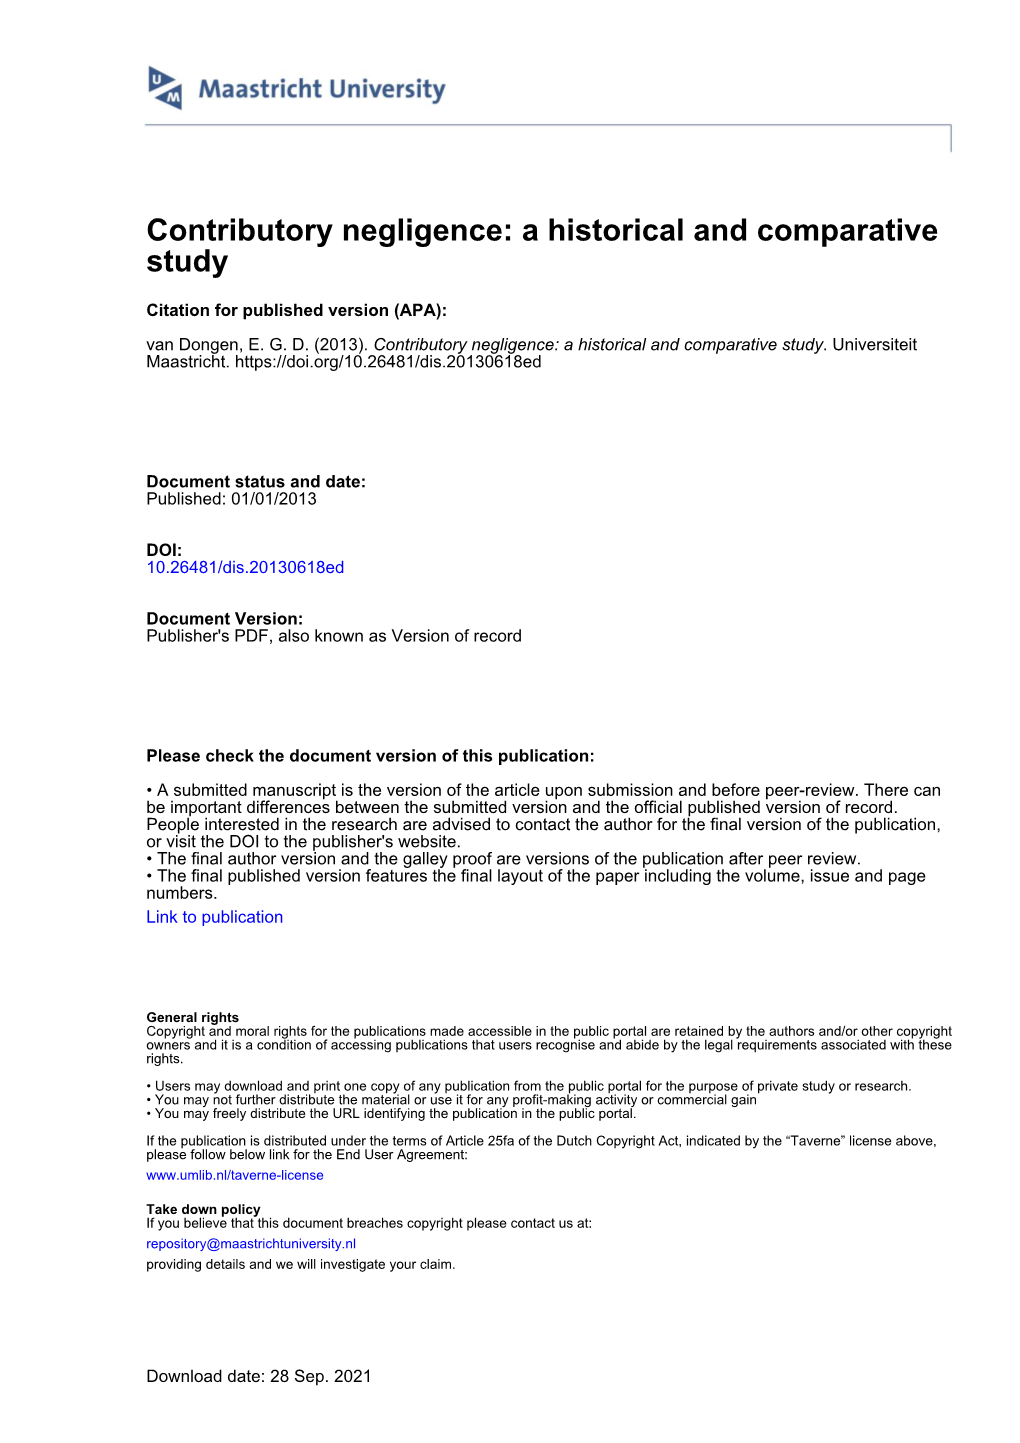 Contributory Negligence: a Historical and Comparative Study